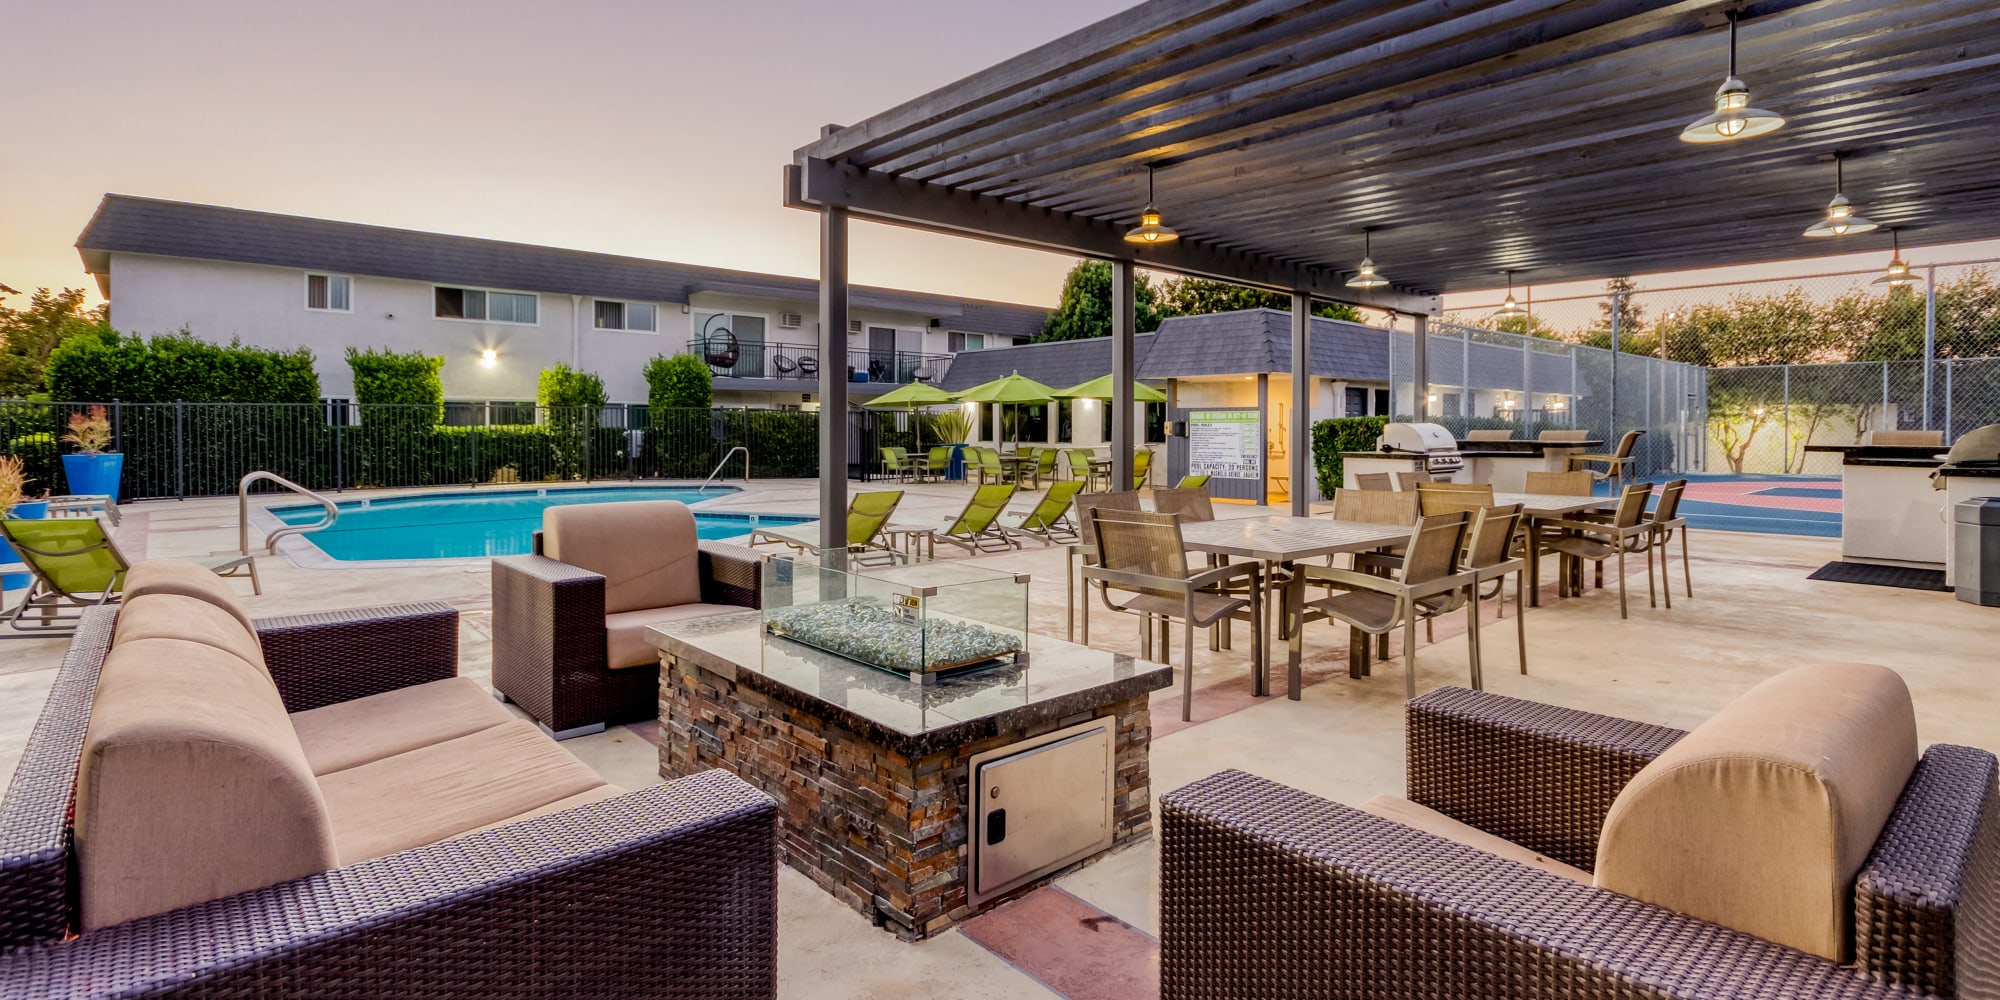 Luxurious swimming pool and outdoor lounging at The Arbors at Magnolia in Anaheim, California